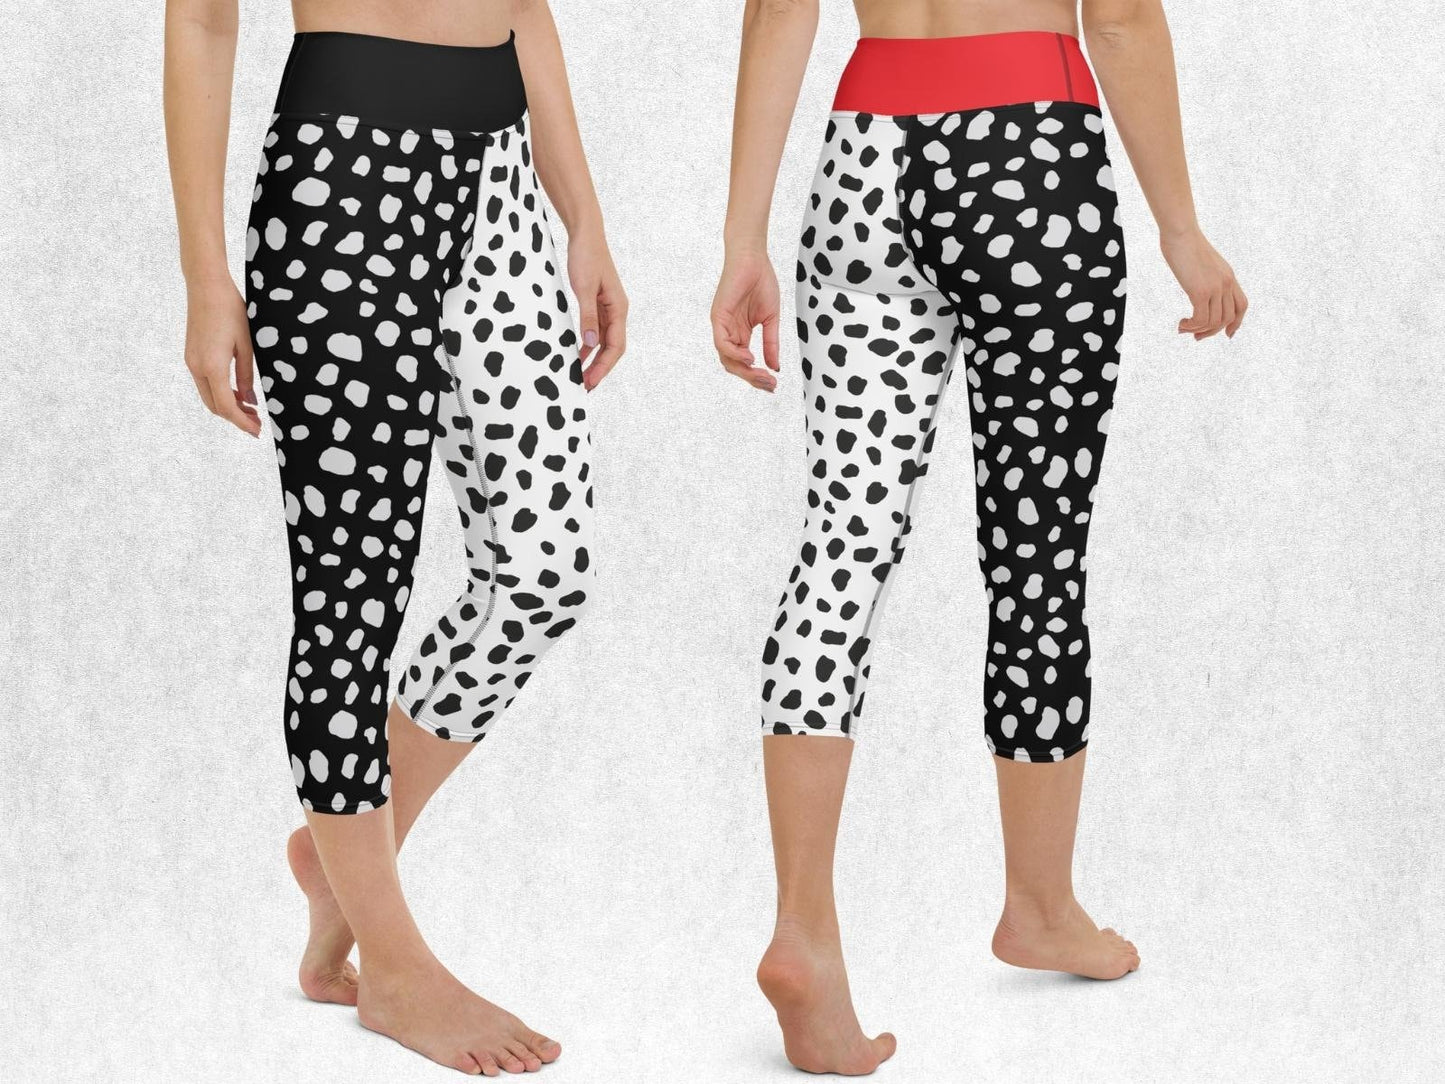 Cruel lady Inspired Yoga Capris, Woman Cosplay, Dalmatians, Adult Halloween Costume, Gift for Her, Cosplay Outfit, Gift for Daughter